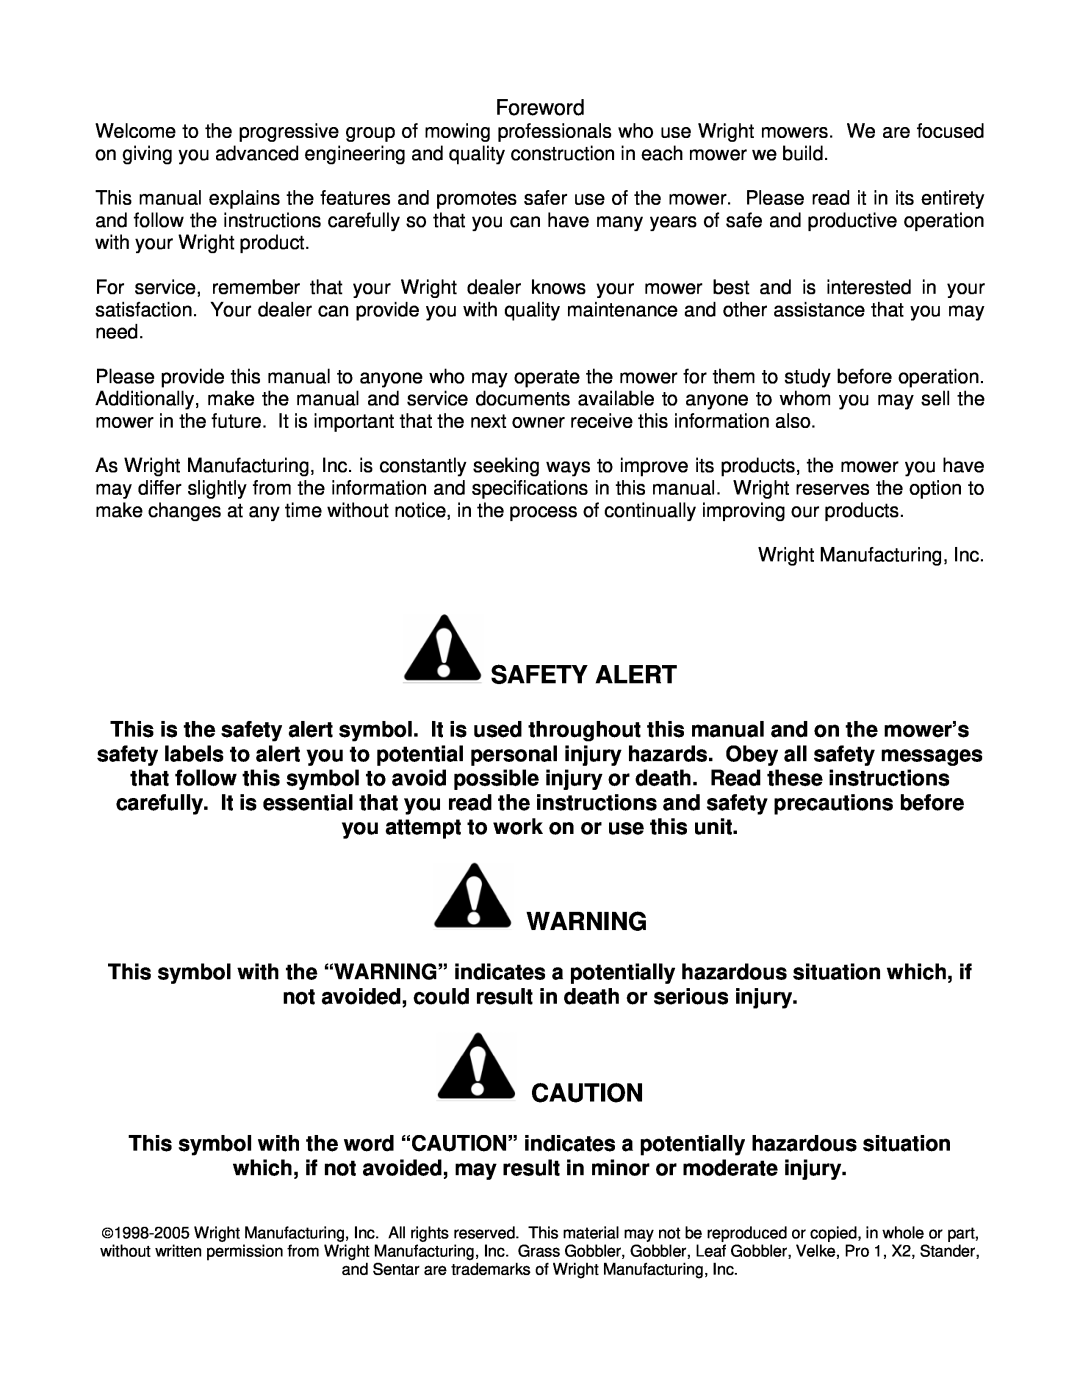 Wright Manufacturing 26077 owner manual Safety Alert, Foreword 